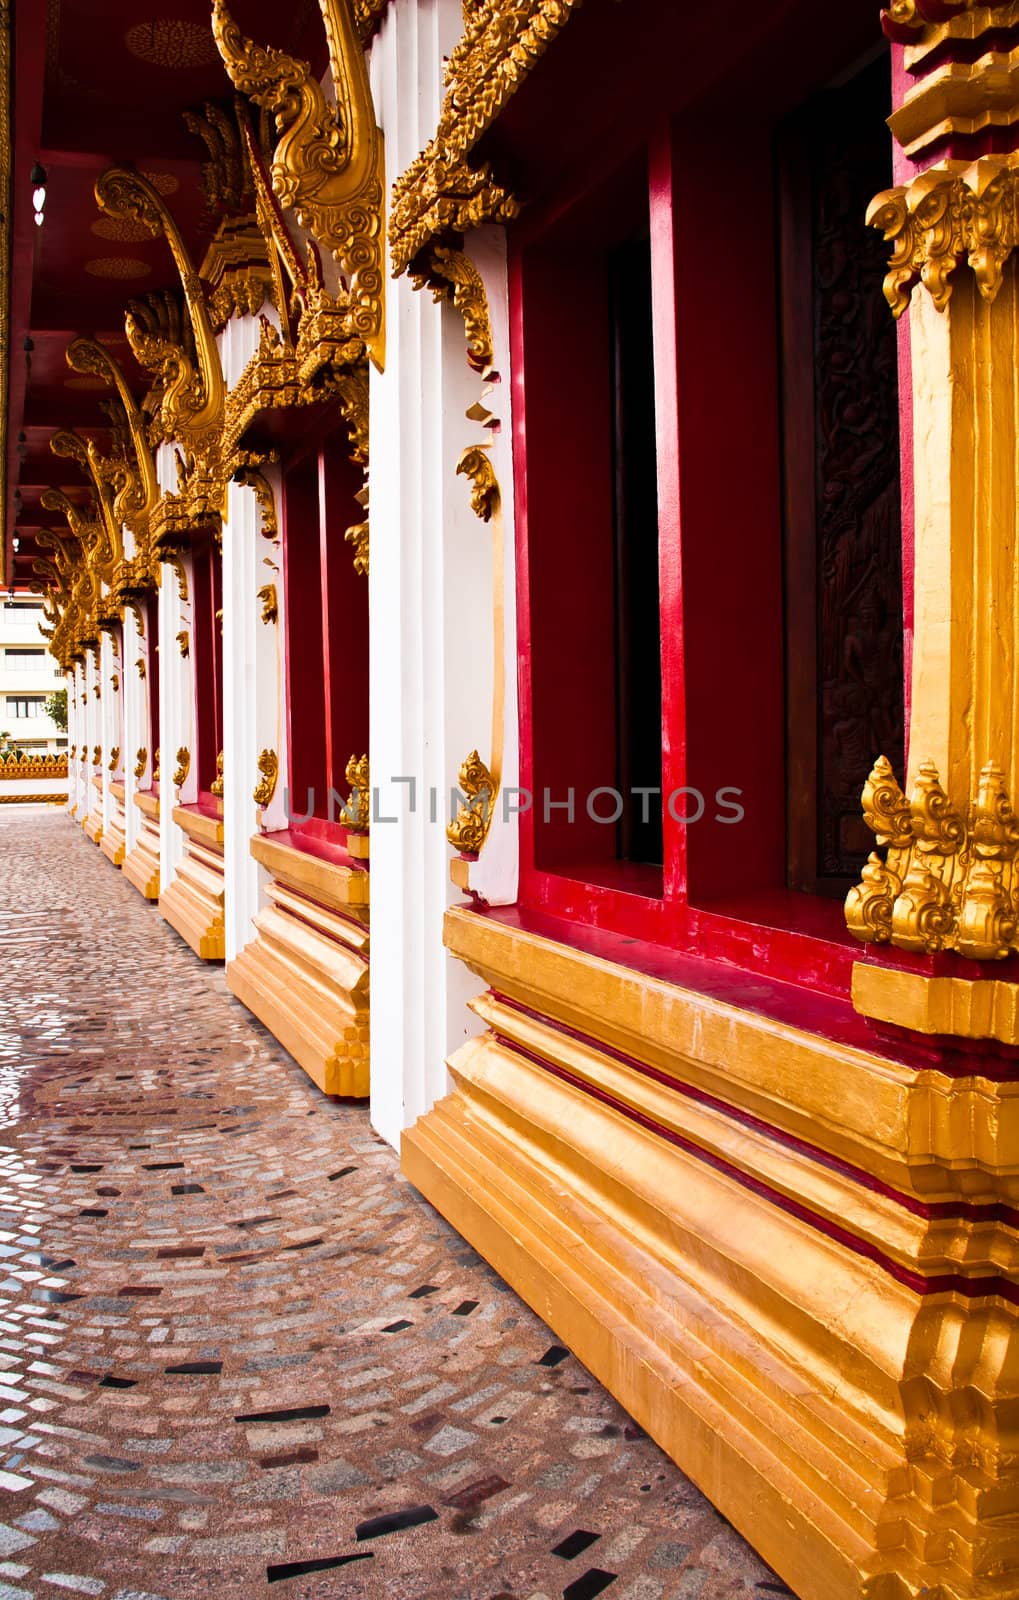 The beauty of the corridors. The Thai temple architecture.